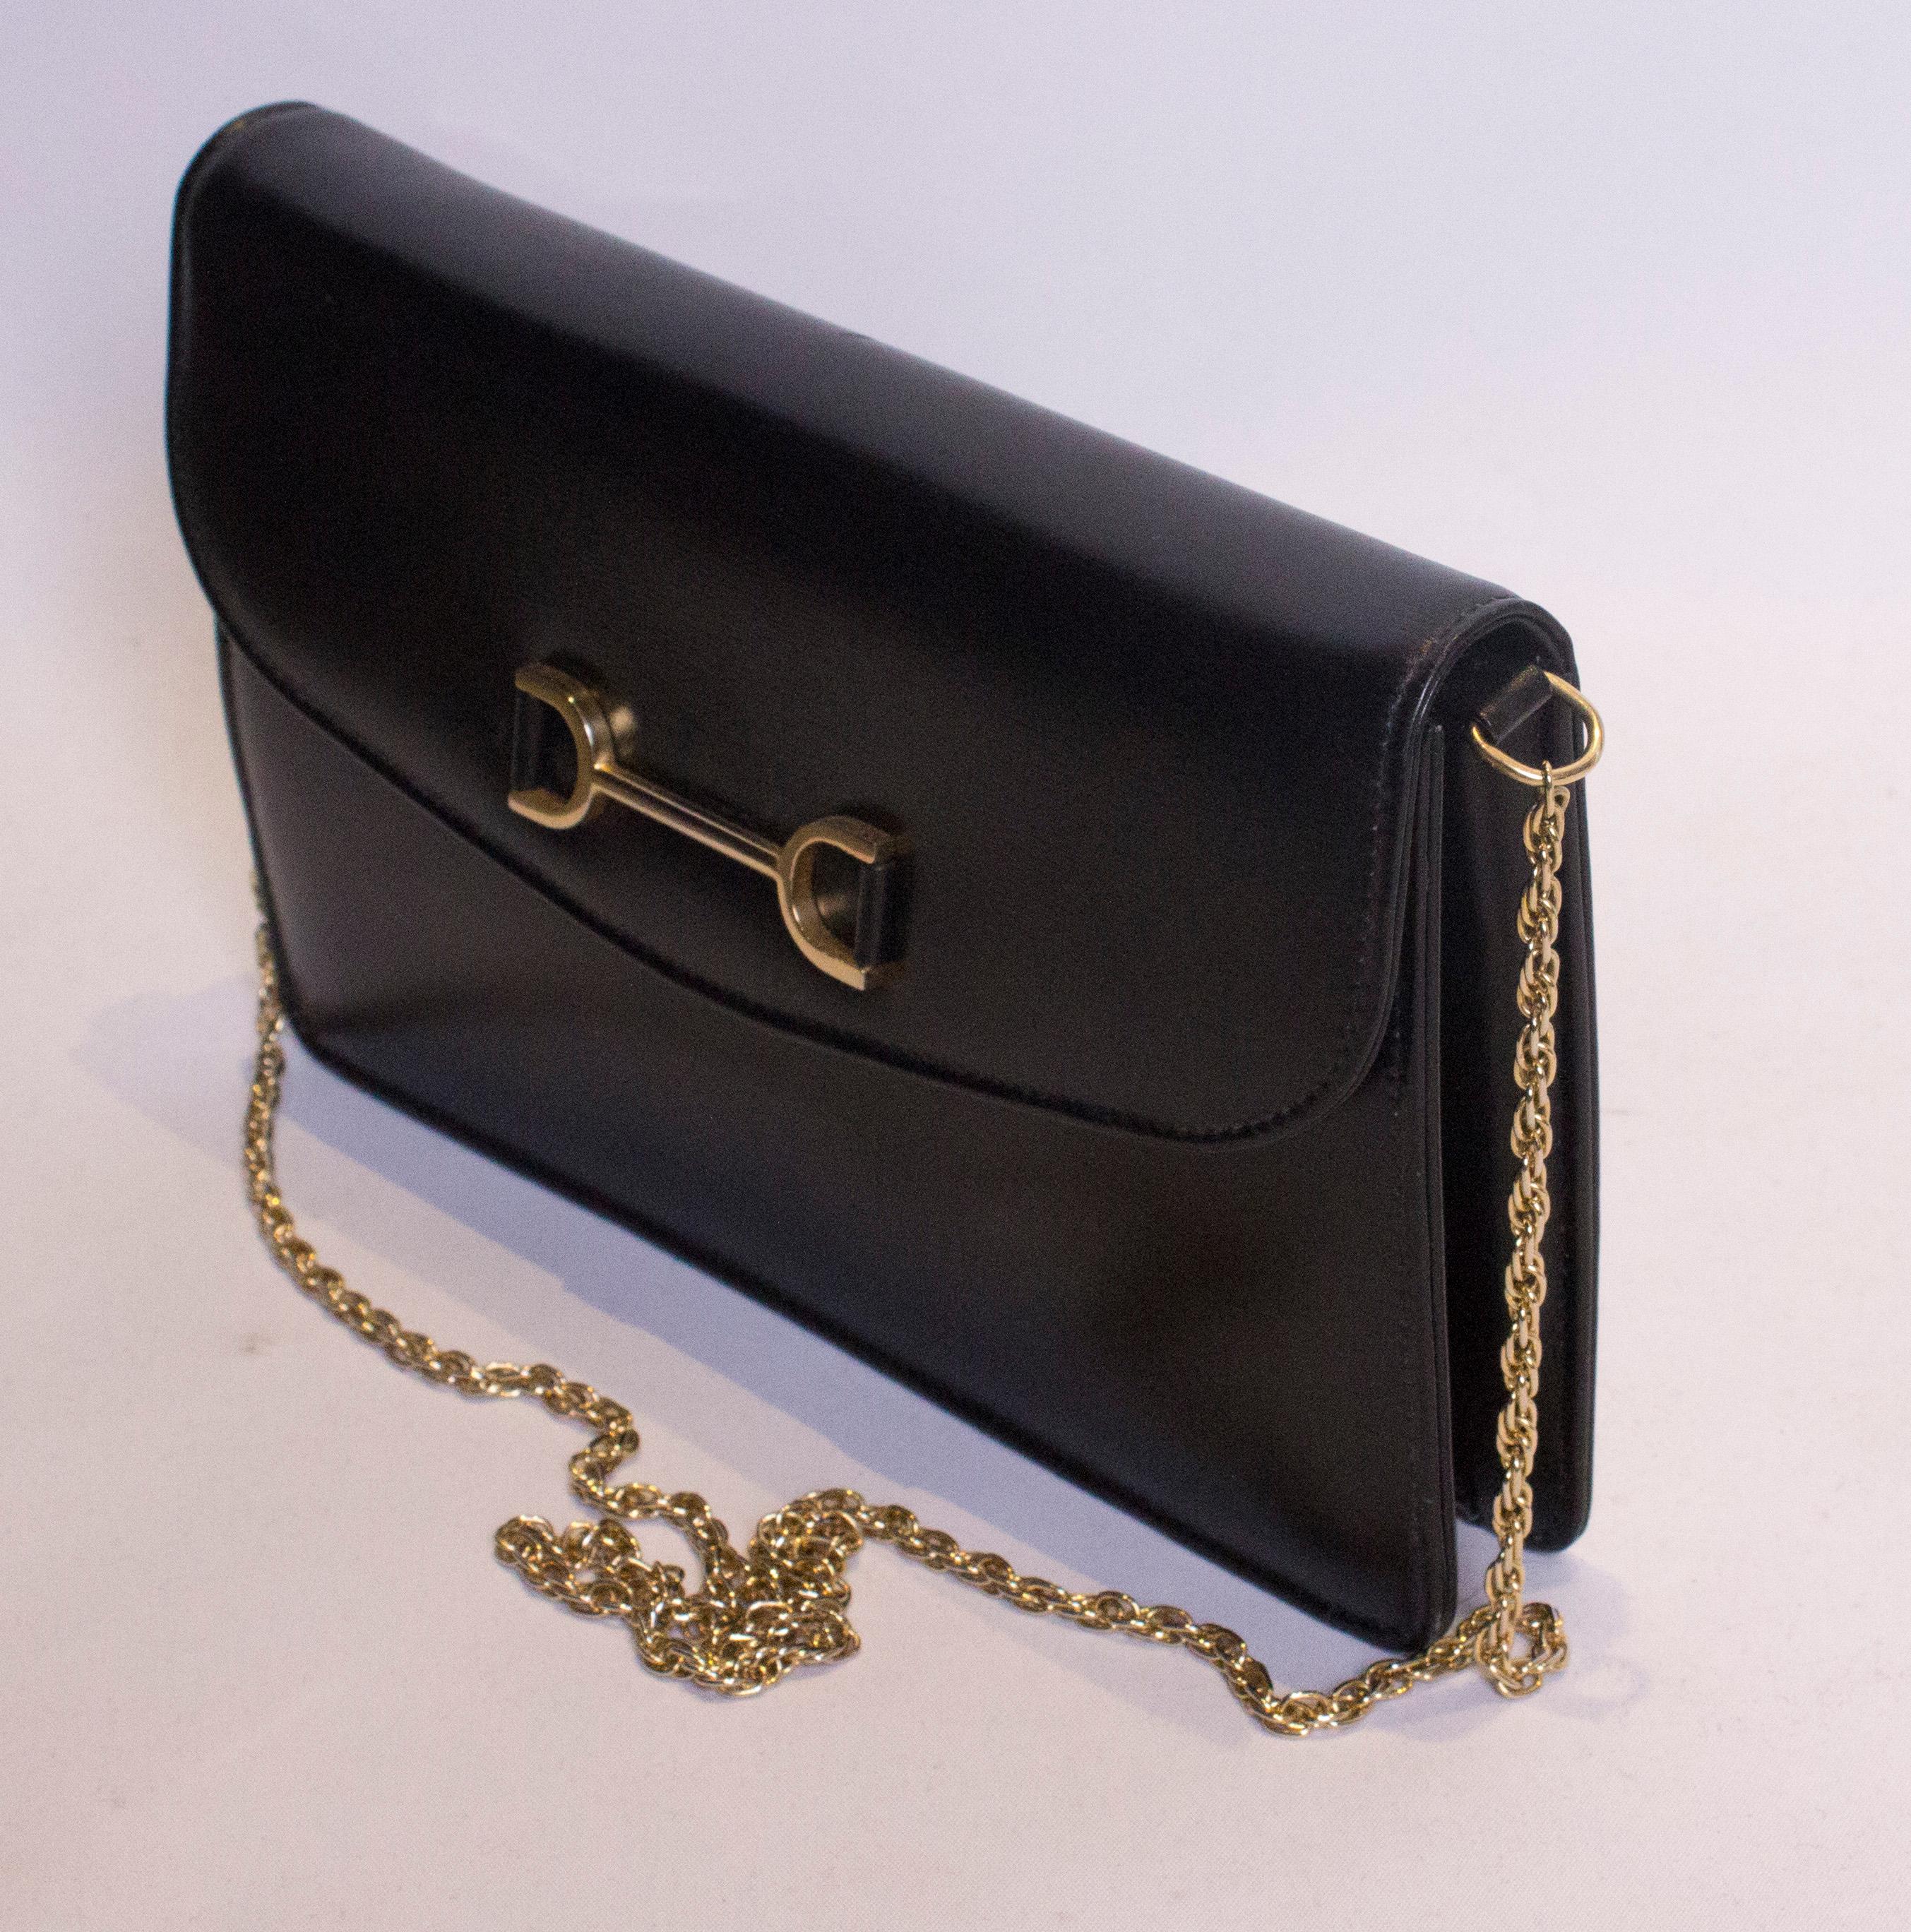 A chic bag by Launer, handbag maker to the Queen.  This bag can be worn as a clutch bag or hand bag with the gold chain fitting inside if not required. Inside there is one internal zip pocket and one pouch pocket. It has a fold over front and popper